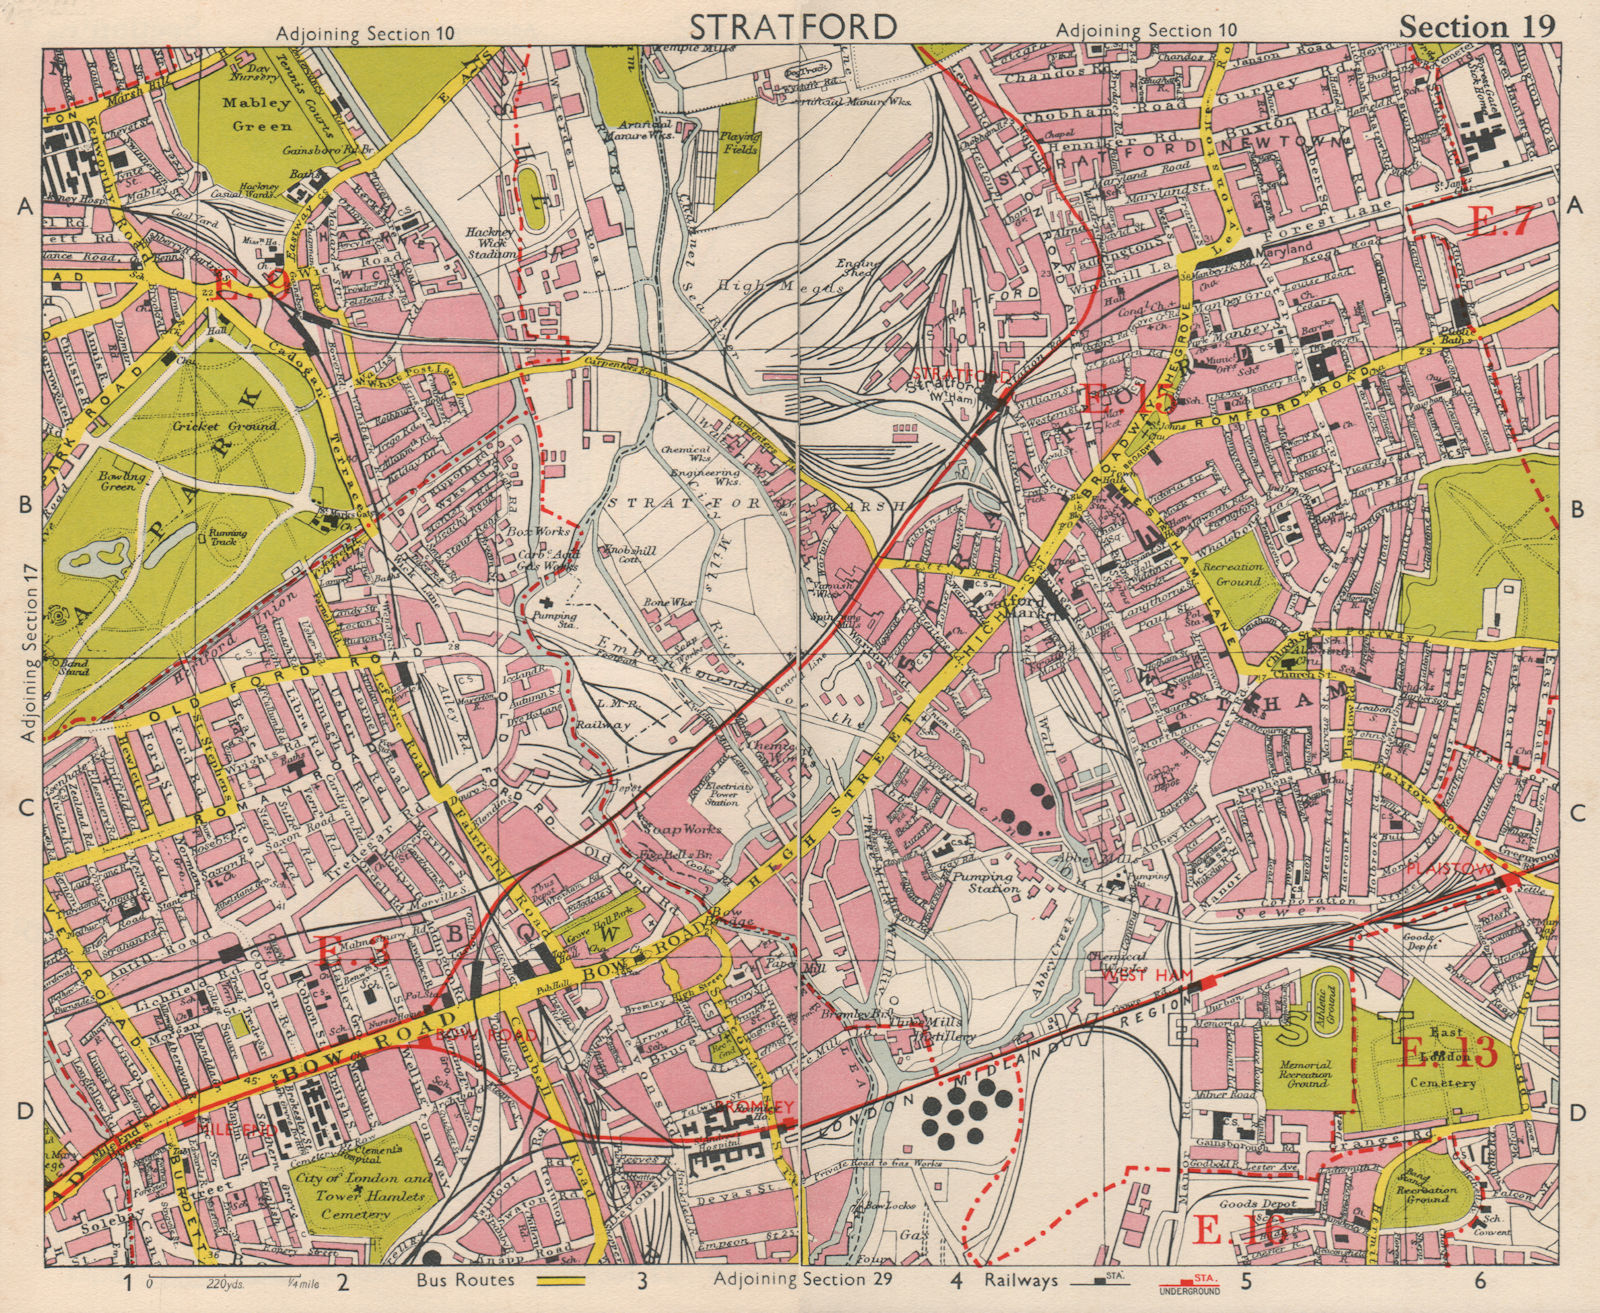 NE LONDON. Stratford Bow Hackney Wick West Ham Old Ford Plaistow.BACON 1963 map